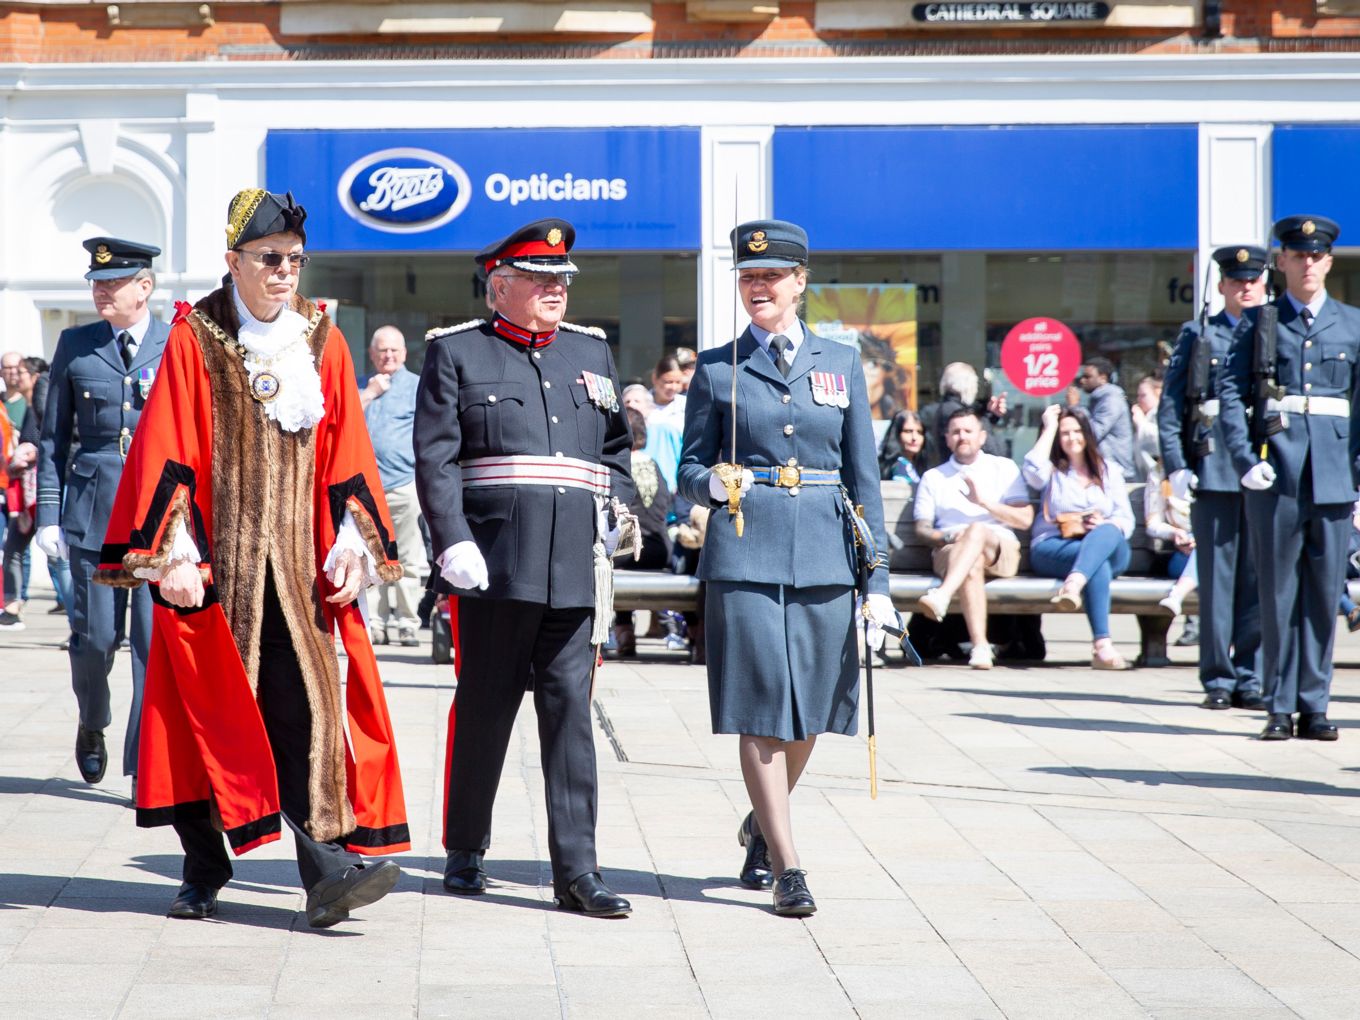 Parade Commander, Sqn Ldr Emma Wolstenholme with Colonel Mark Knight MBE, Deputy Lord Lieutenant of Cambridgeshire, and Councillor Chris Ash, The Right Worshipful the Mayor of the City of Peterborough